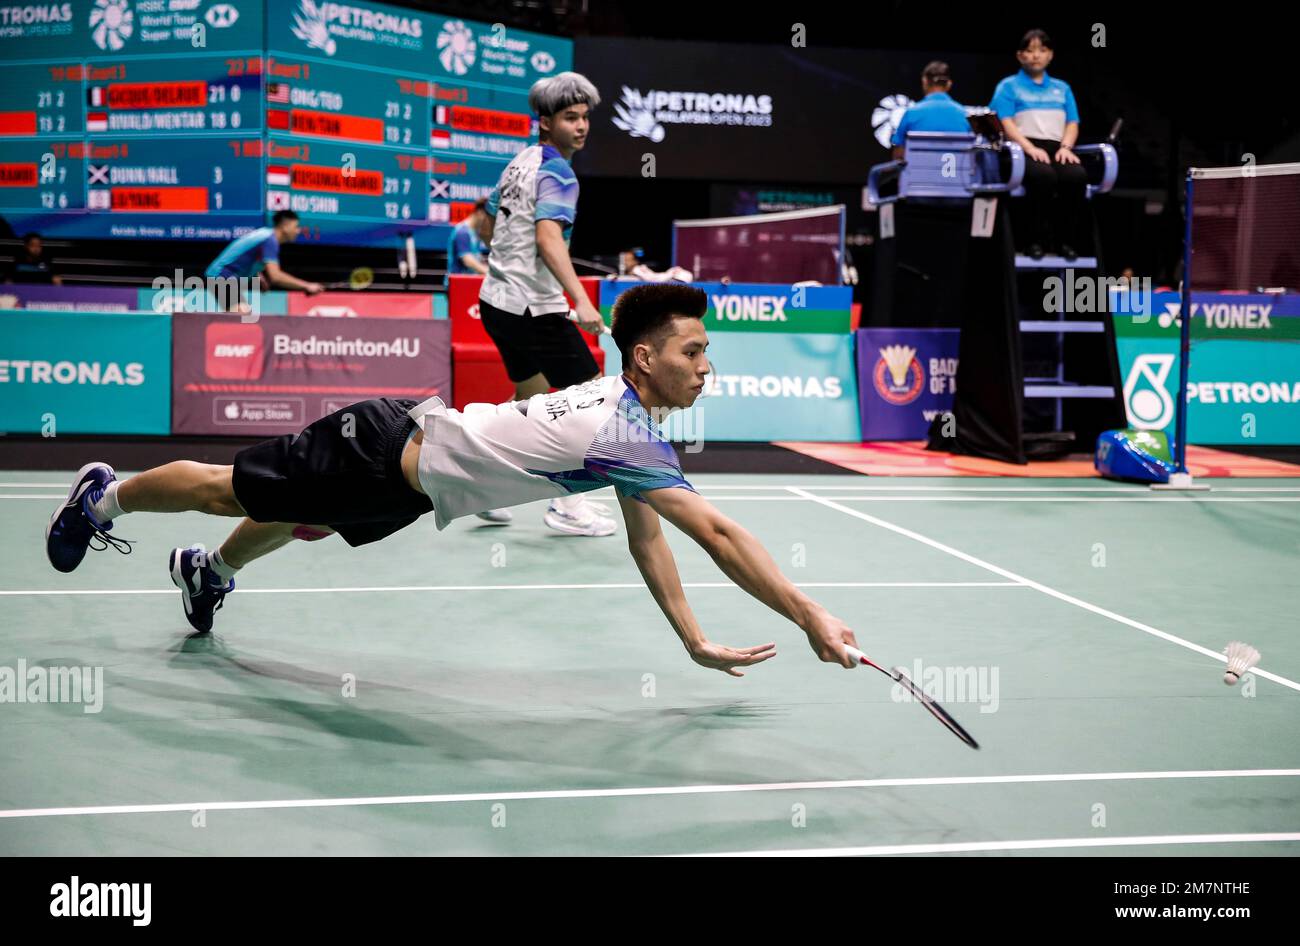 Kuala Lumpur, Malaysia. 10th Jan, 2023. Ong Yew Sin and Teo Ee Yi of Malaysia competes against Ren Xiang Yu and Tan Qiang of China during the Men's Doubles first round match of the Petronas Malaysia Open 2023 at Axiata Arena. Ong Yew Sin and Teo Ee Yi of Malaysia won with scores; 21/20/21 : 13/22/15. Credit: SOPA Images Limited/Alamy Live News Stock Photo